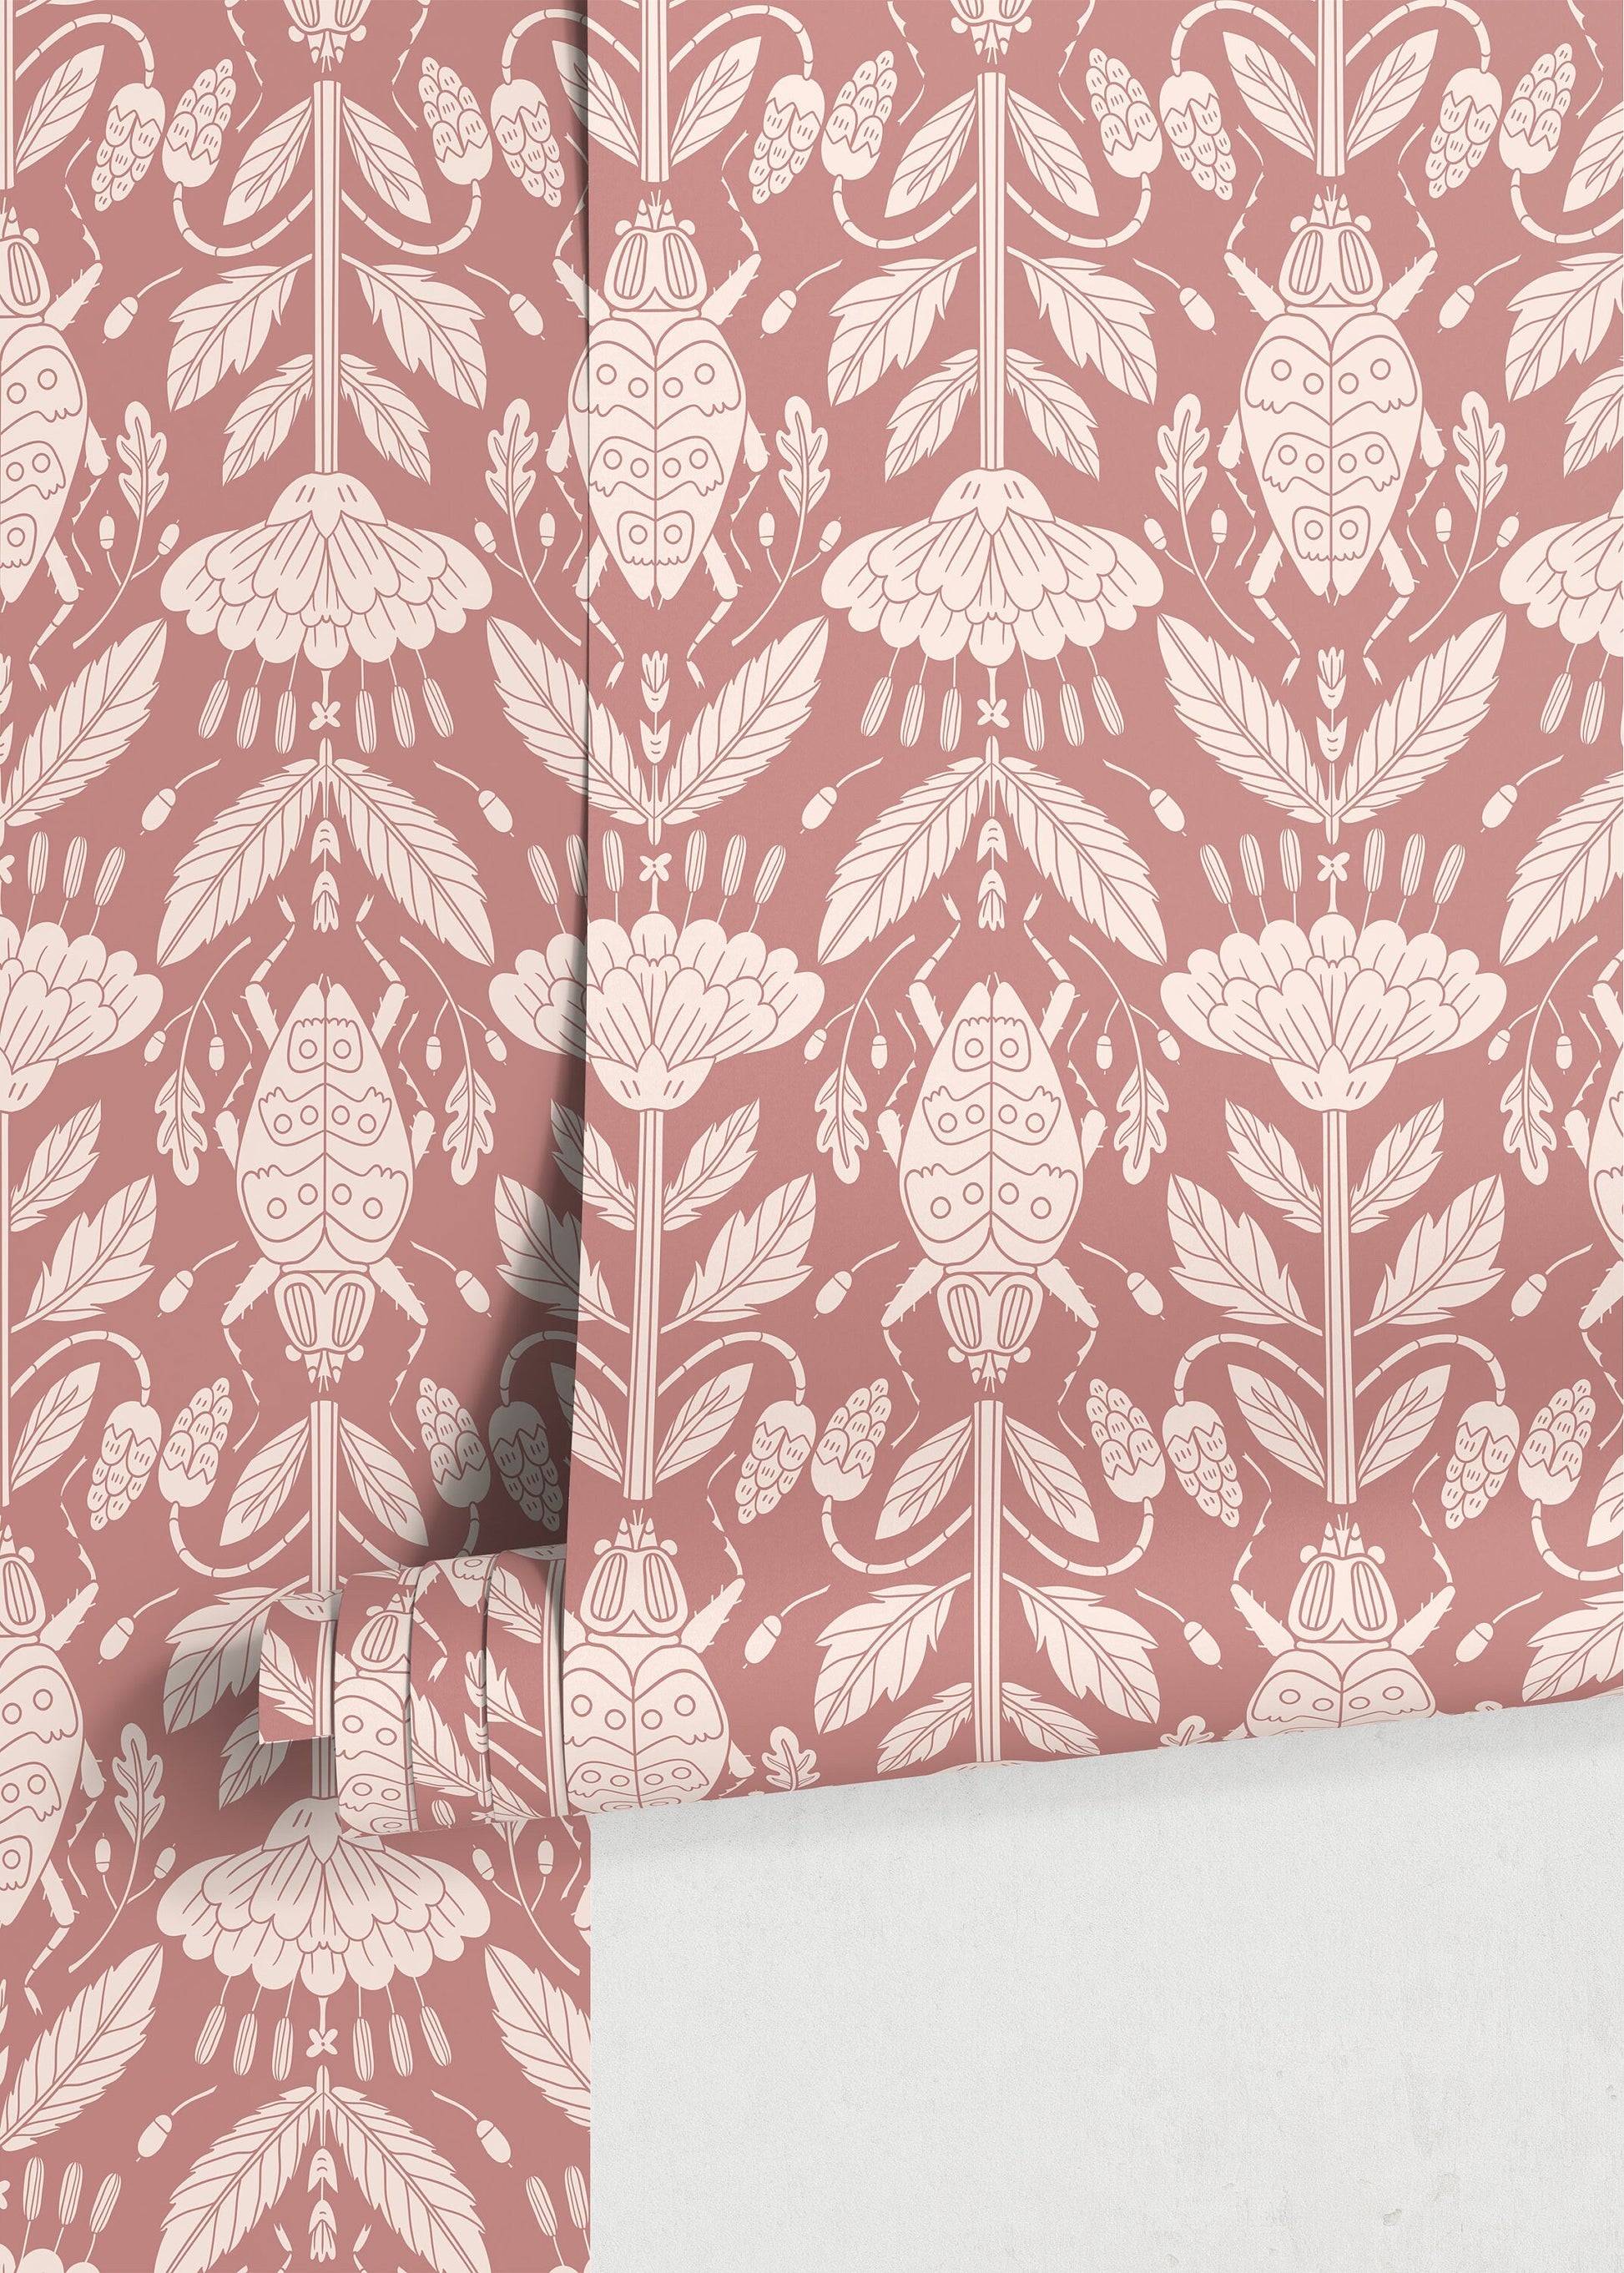 Pink Floral and Beetle Wallpaper / Peel and Stick Wallpaper Removable Wallpaper Home Decor Wall Art Wall Decor Room Decor - D296